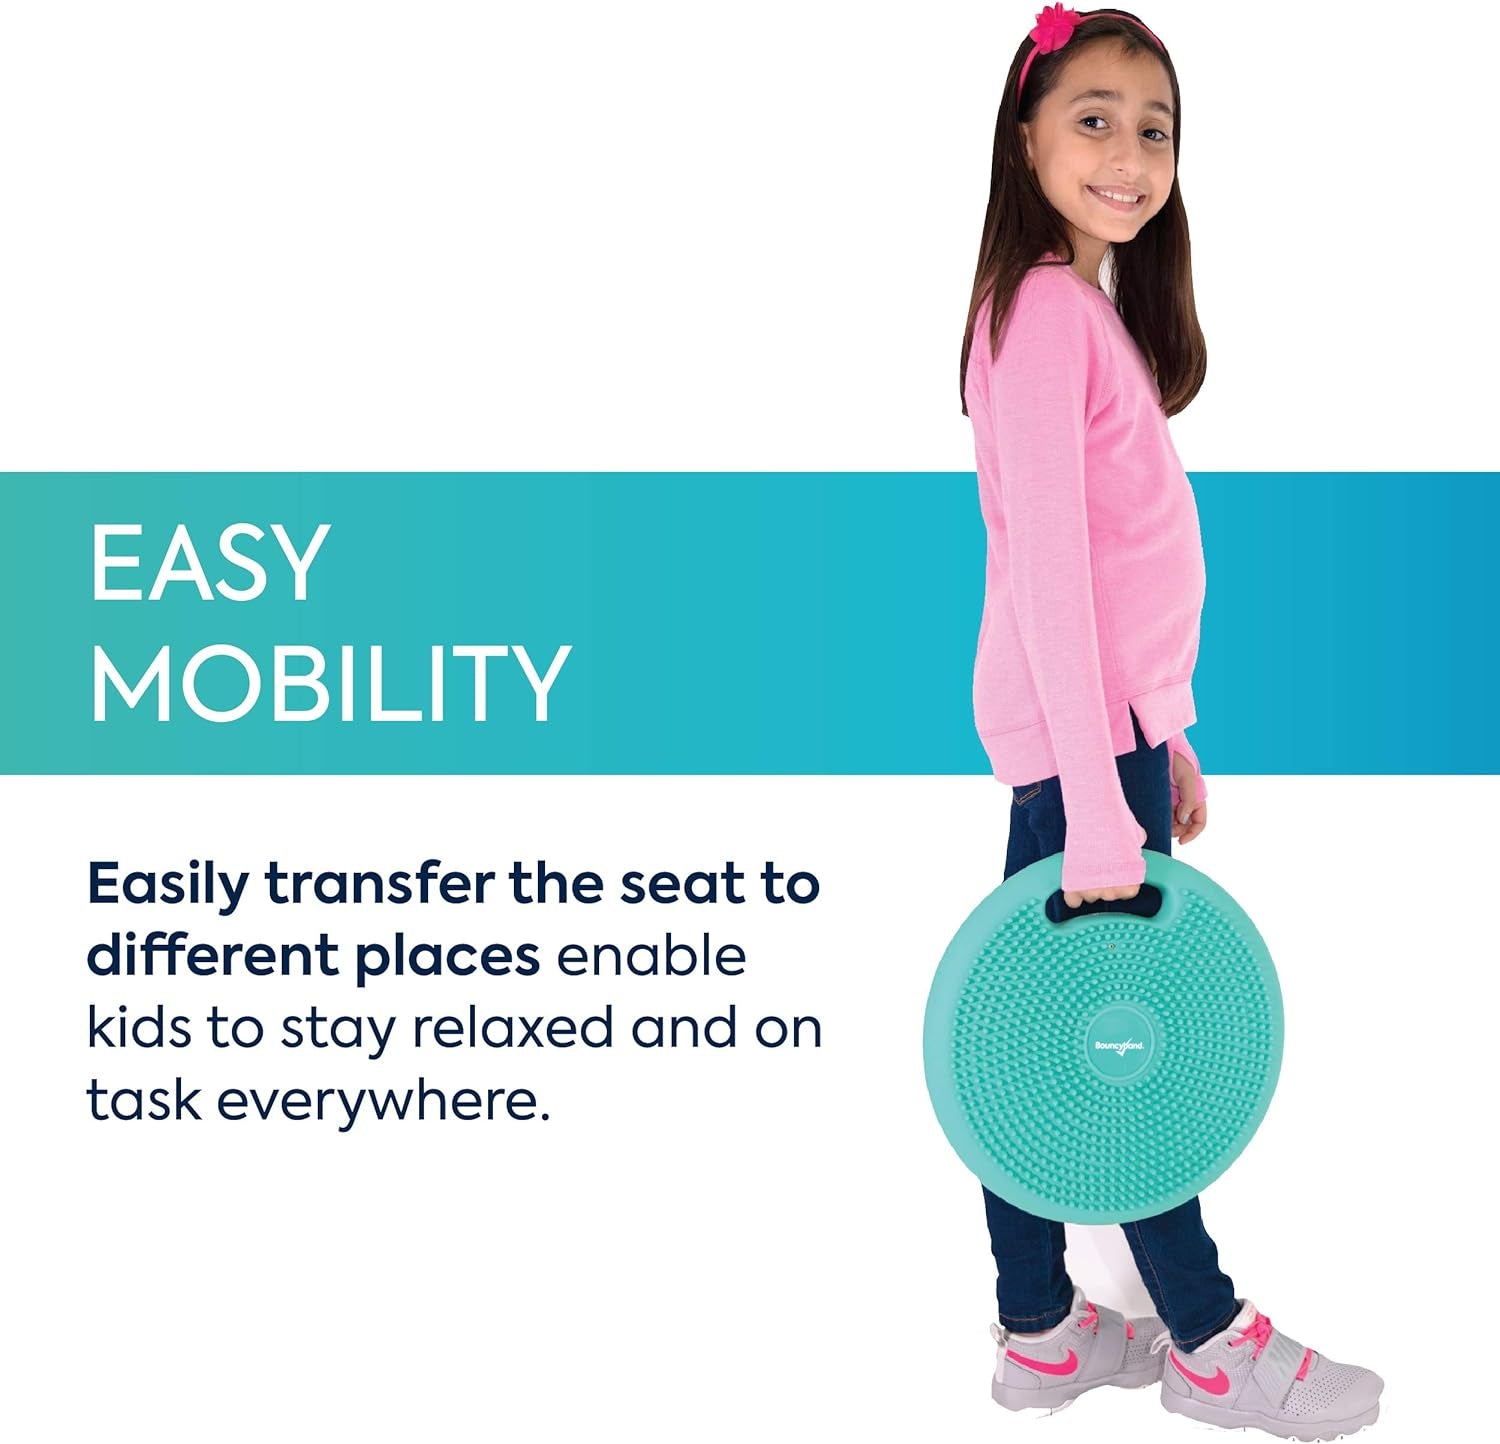 Bouncyband Portable Wiggle Seat Sensory Cushion Improves Kids’ Focus in School & Home (Green)